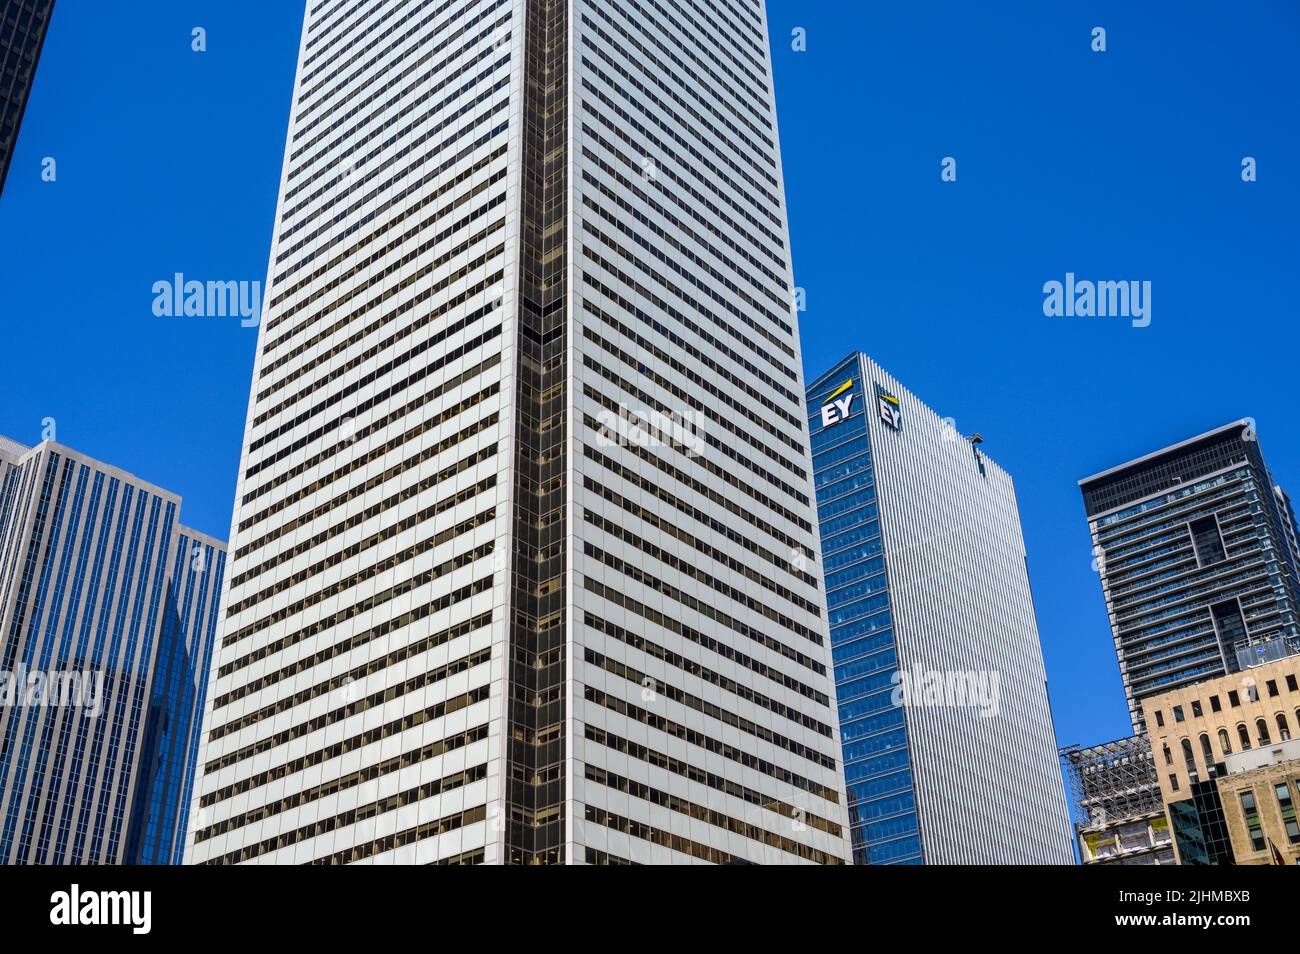 Bank of Montreal (BMO) building towering next to Ernst & Young (EY) office building seen from Bay Street, downtown Toronto, Ontario, Canada. Stock Photo